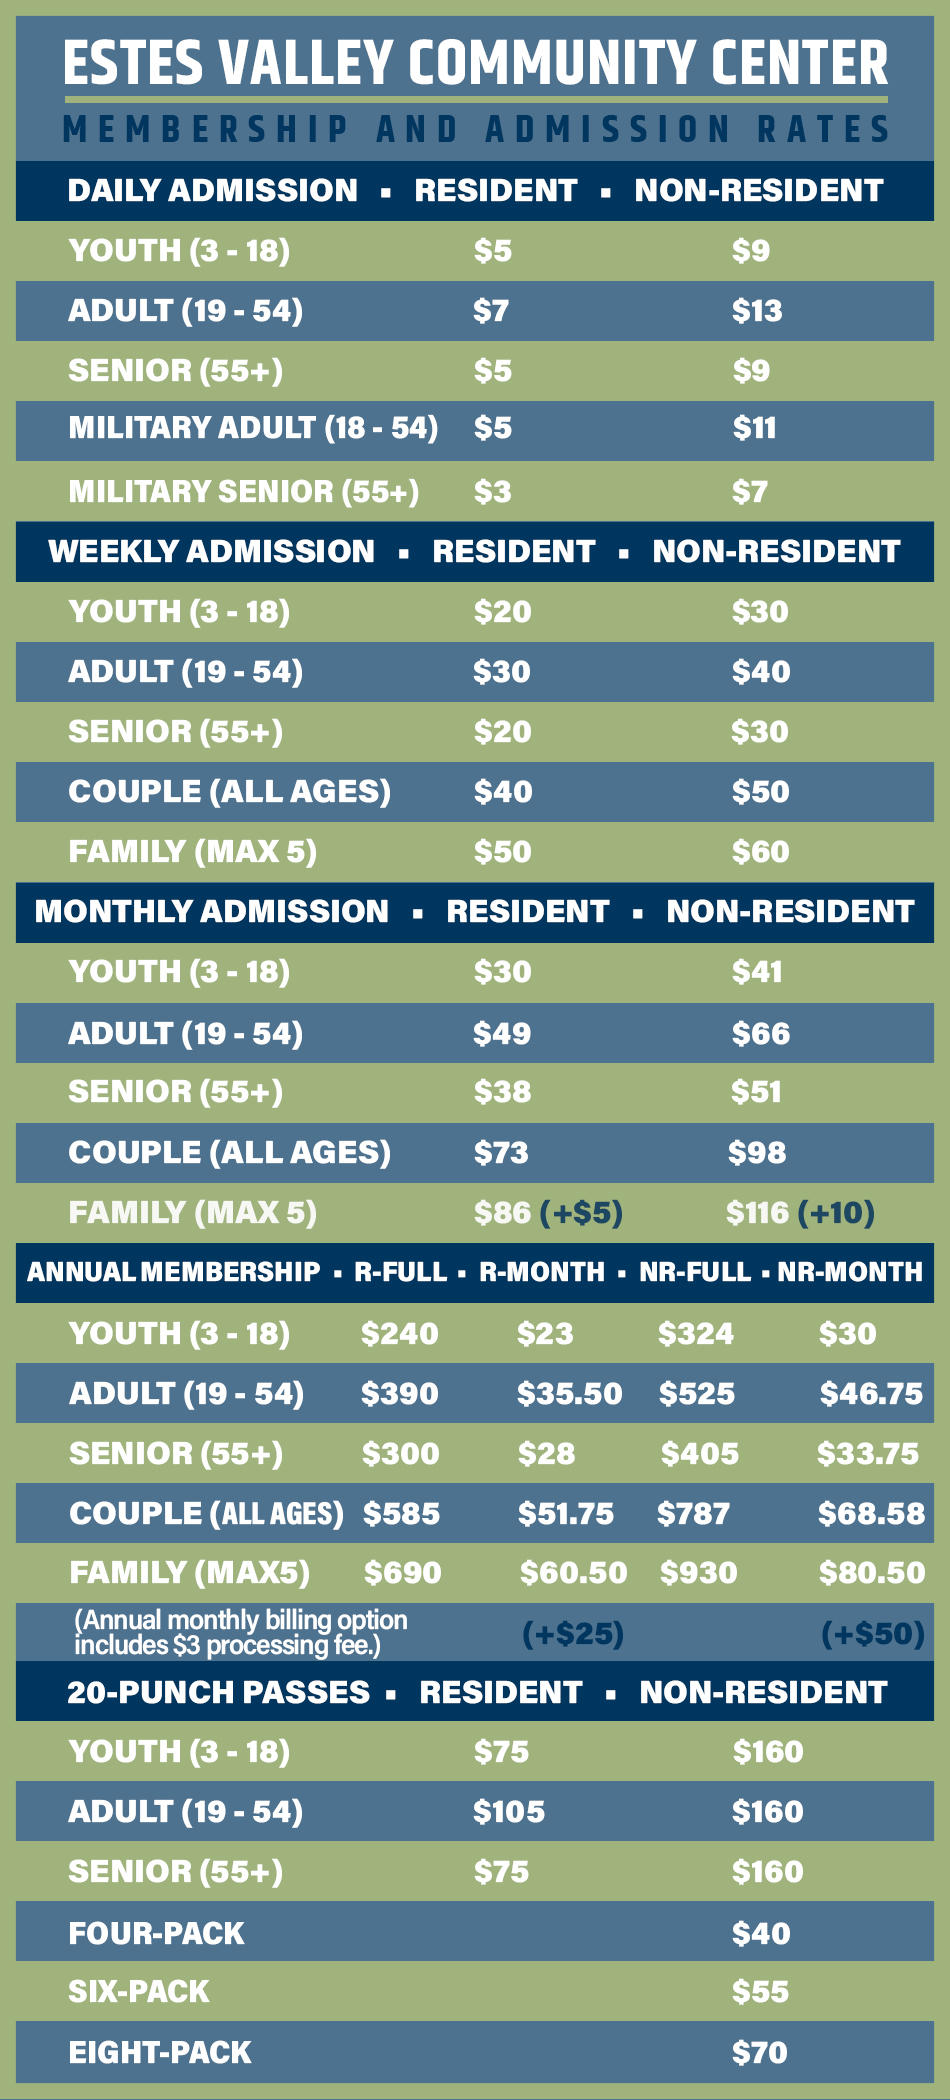 ADMISSION RATE CARD